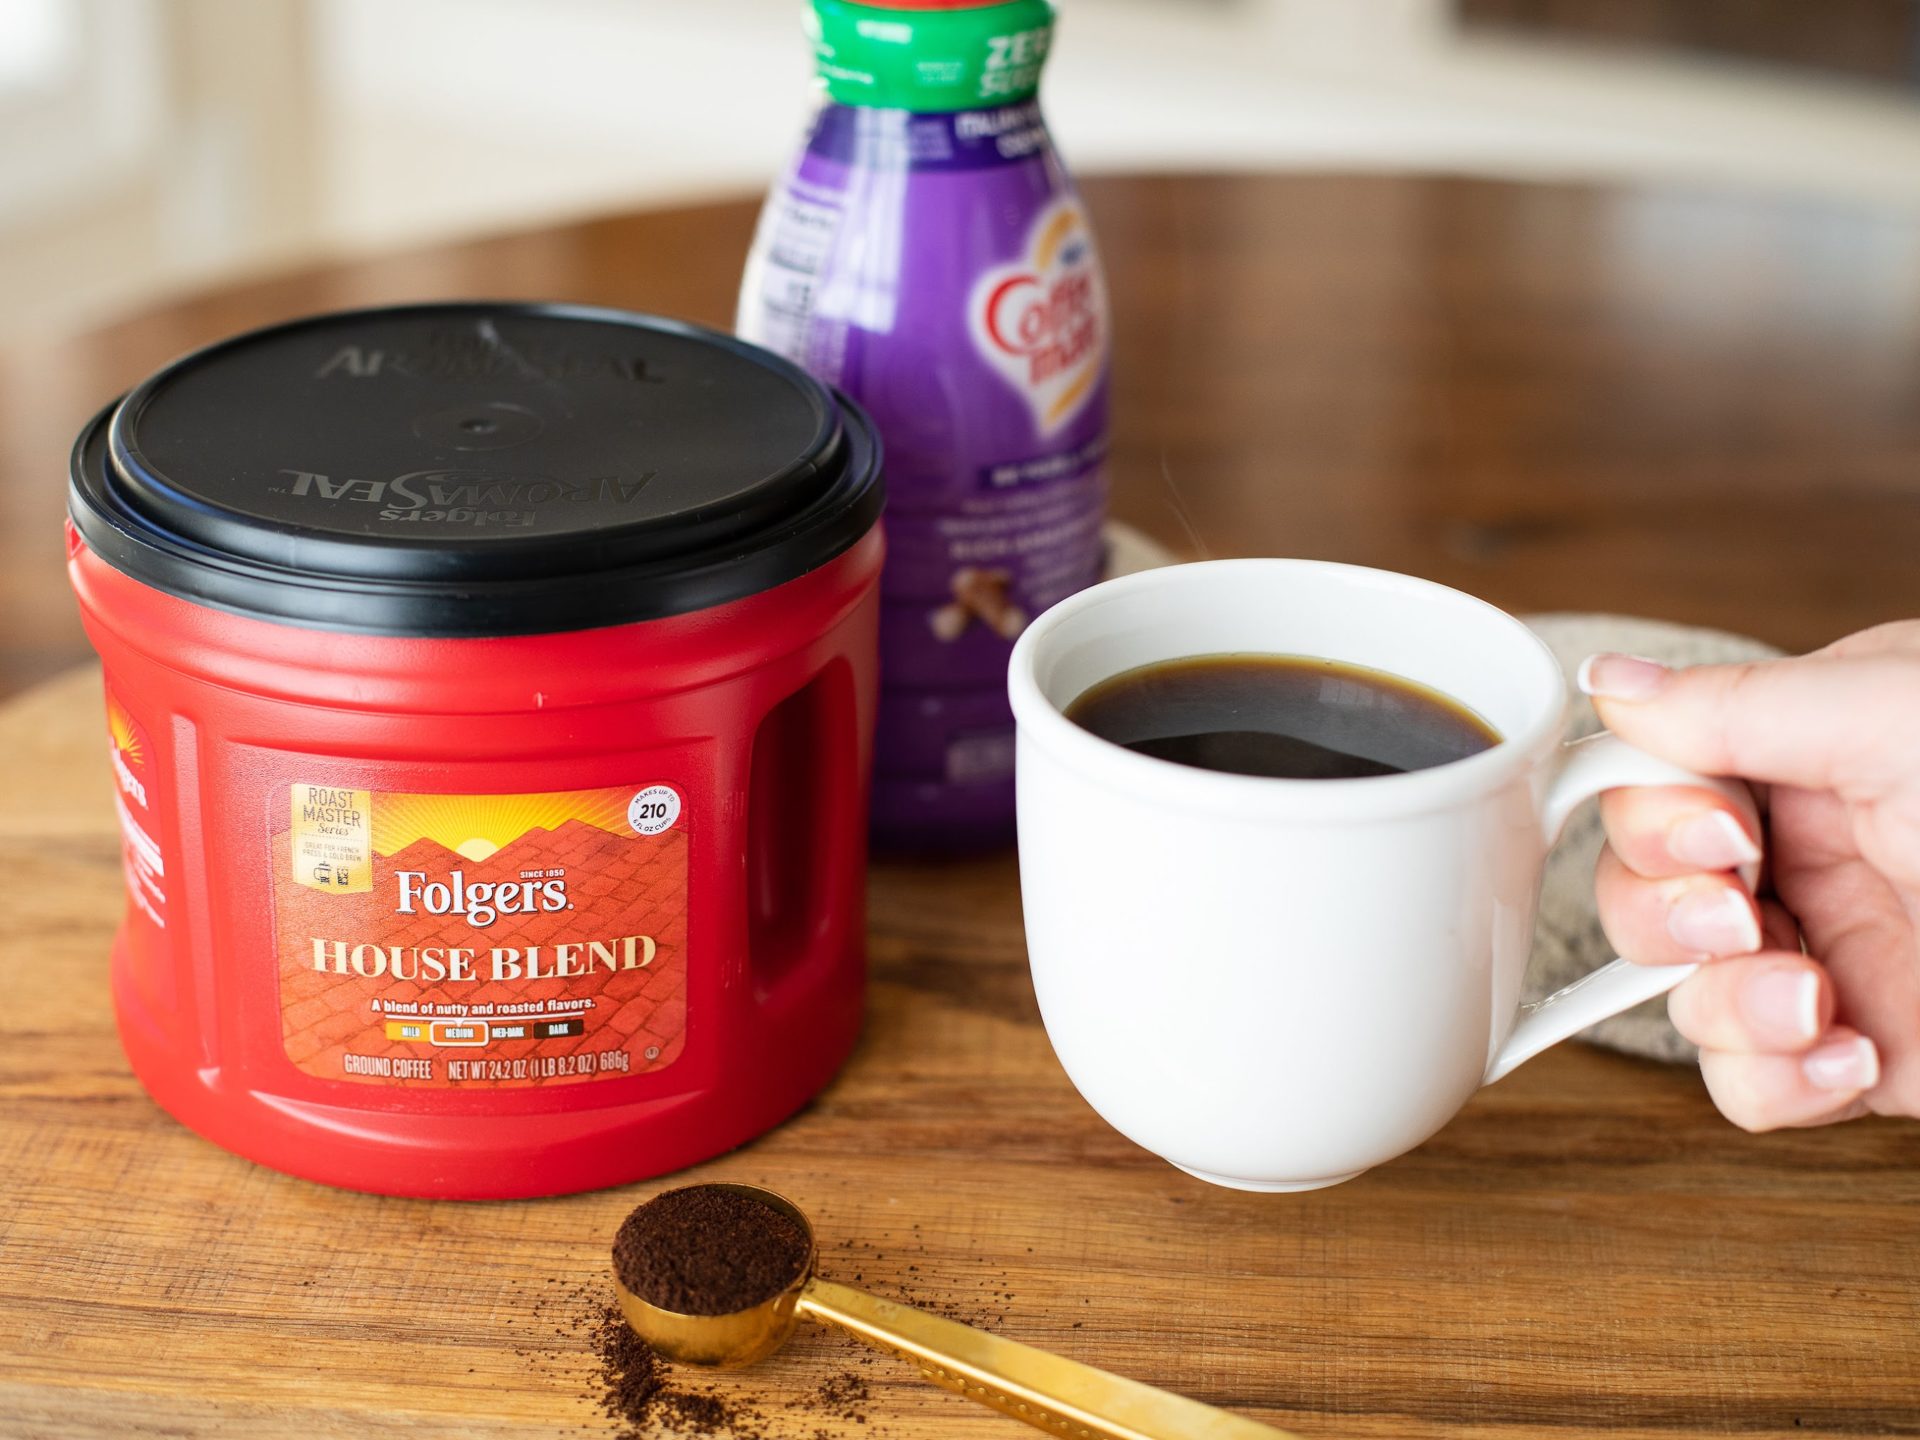 Folgers Coupon Makes Big Containers Of Coffee As Low As $7.49 At Publix (Regular Price $12.86)